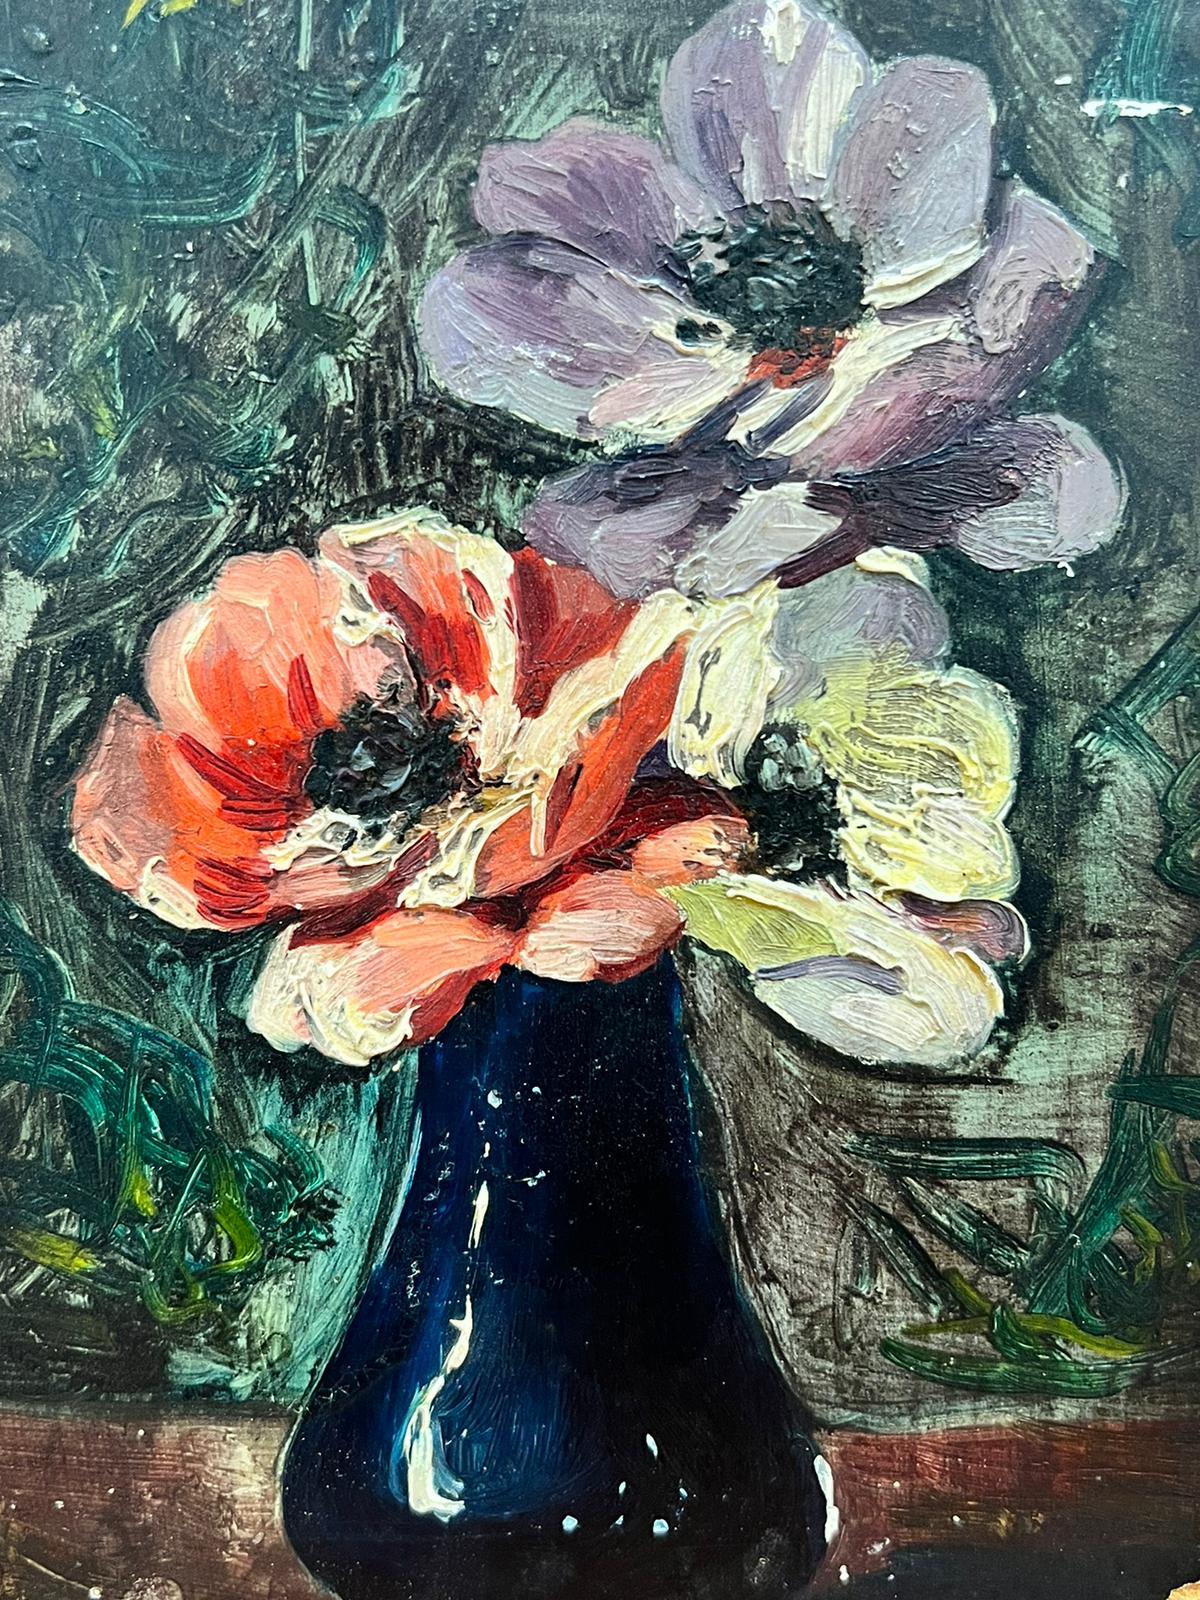 Artist/ School: French School, signed and dated 1924

Title: Vase de Fleurs

Medium: oil on board

Size: 6 x 4.5 inches

Provenance: private collection

Condition: The painting is in overall very good and sound condition, shabby round the edges but